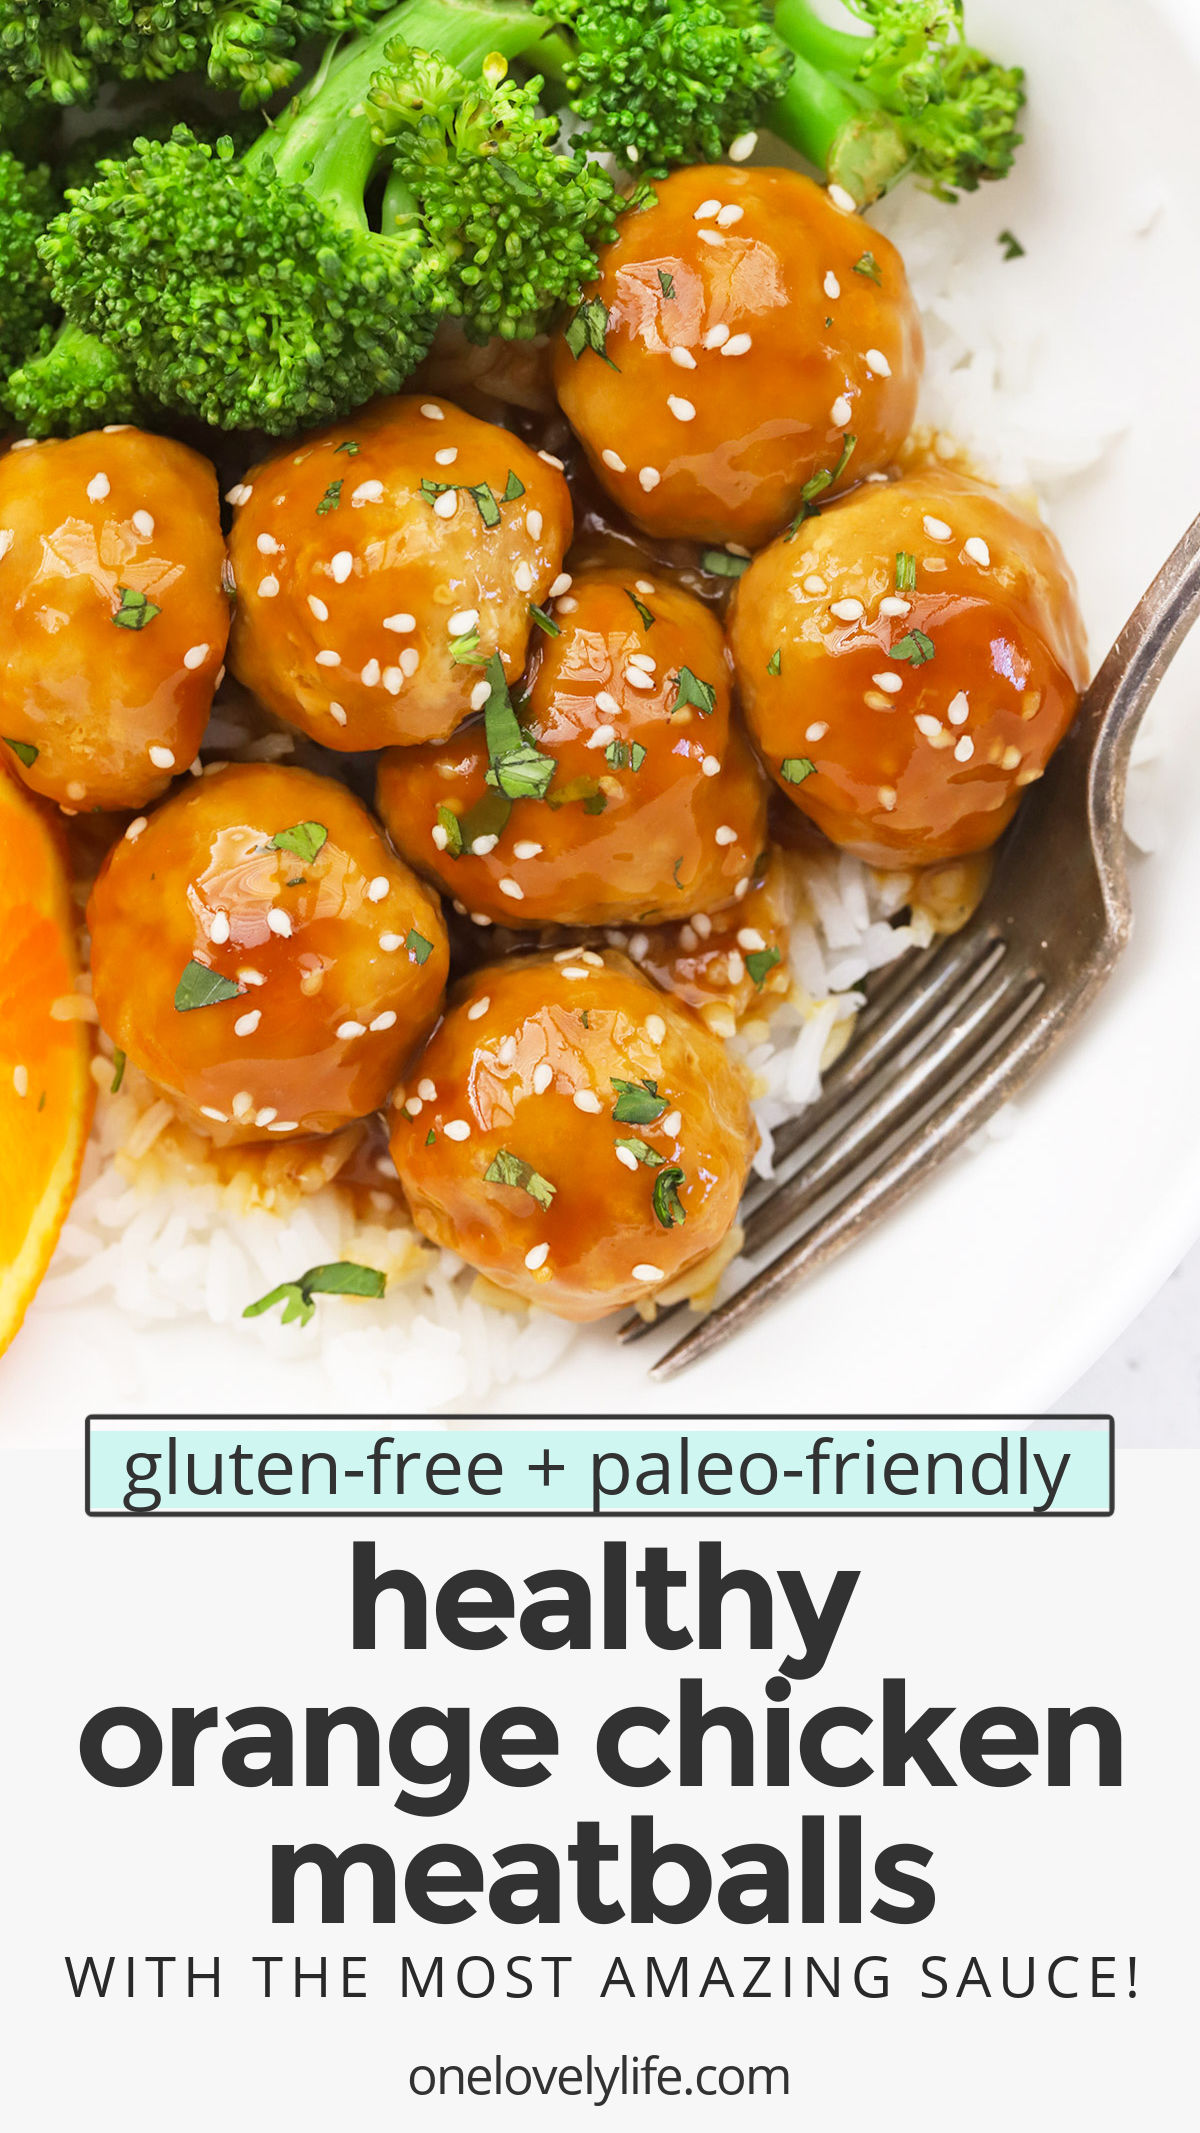 Healthy Orange Chicken Meatballs - These yummy gluten-free chicken meatballs are smothered in our sweet and tangy orange stir-fry sauce to make a delicious dinner! (Paleo-Friendly) // Paleo Orange Chicken Meatballs Recipe // Sauce For Orange Chicken // Glazed Orange Chicken Meatballs //